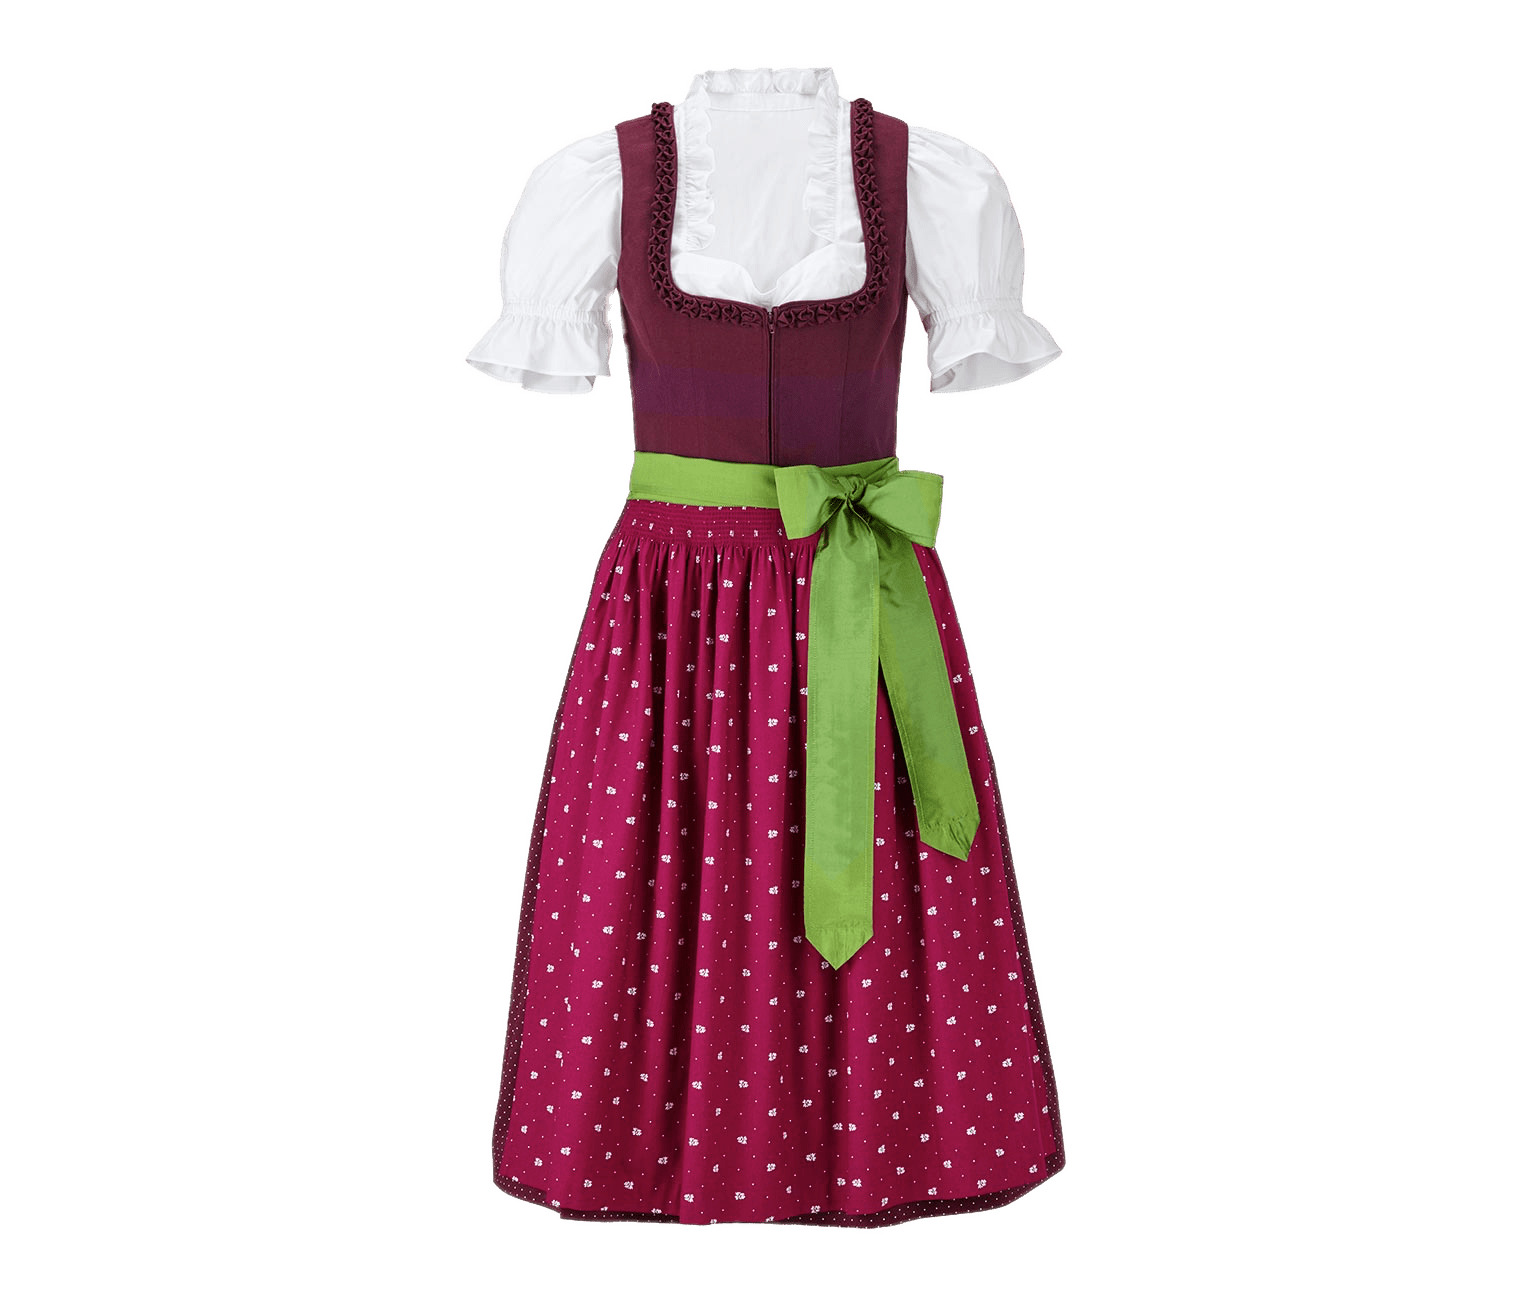 Red Dirndl Dress With Green Belt icons